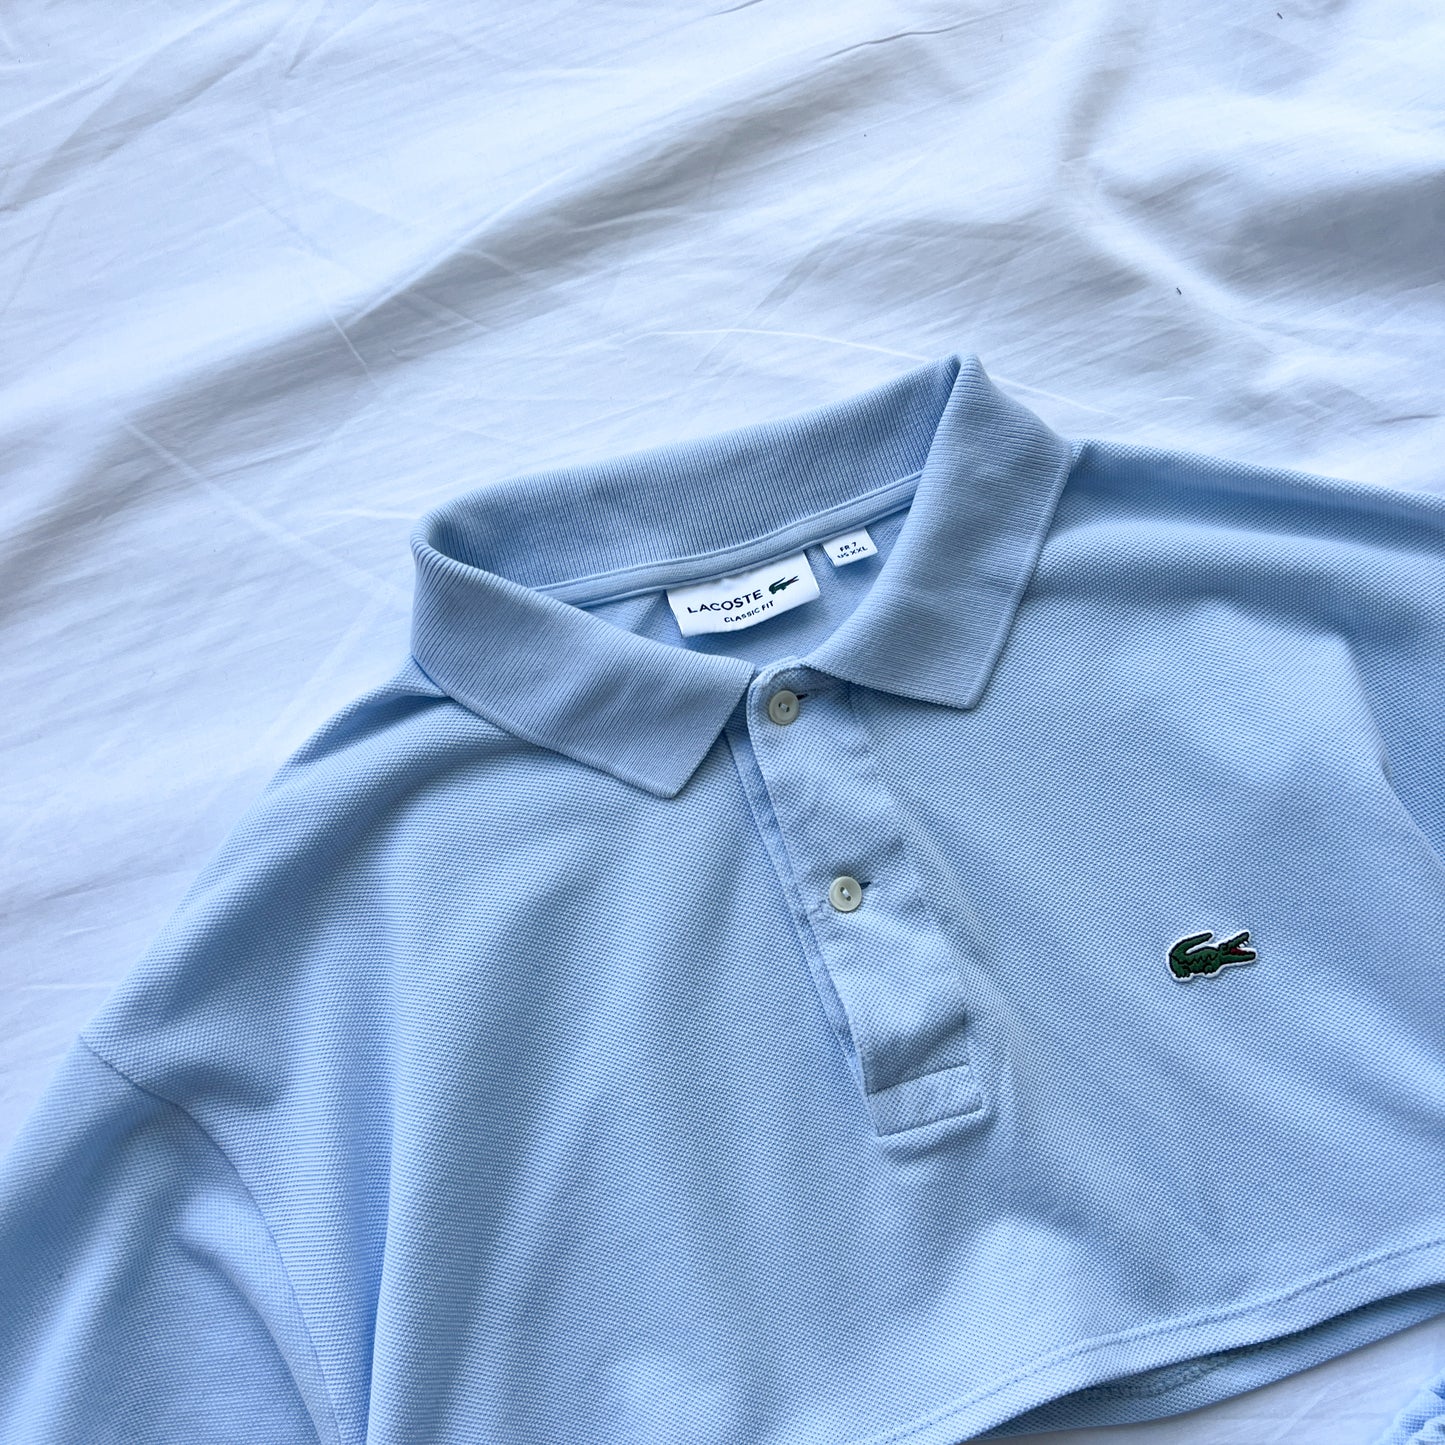 (XS/S) Lacoste reworked set vintage baby blue